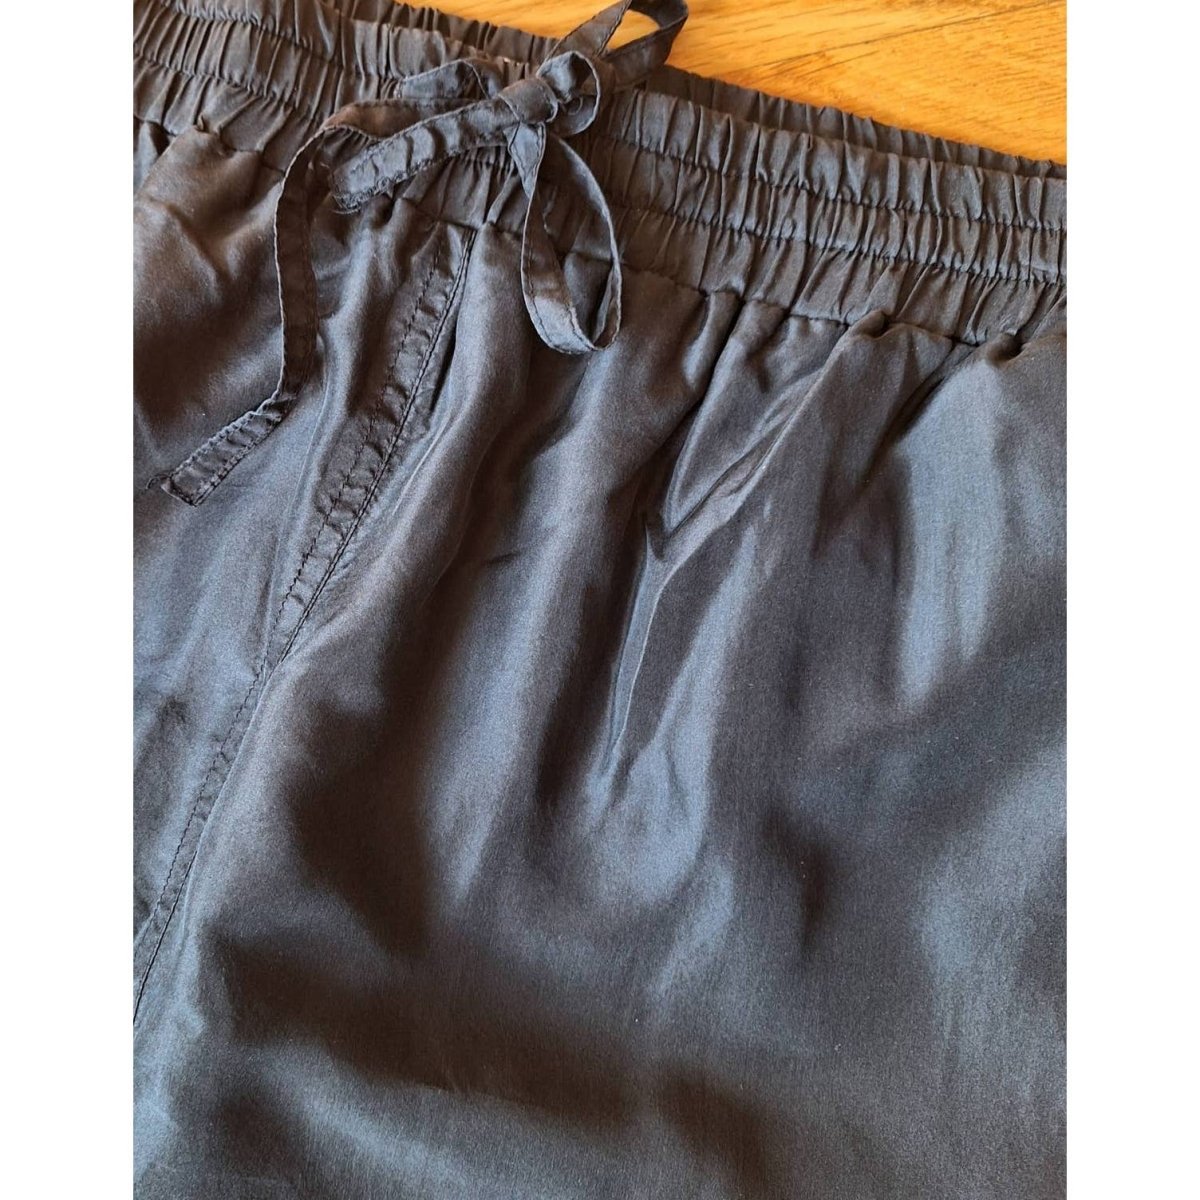 80s/90s All Silk Drawstring Pants Size M/L Waist 27-38" - themallvintage The Mall Vintage